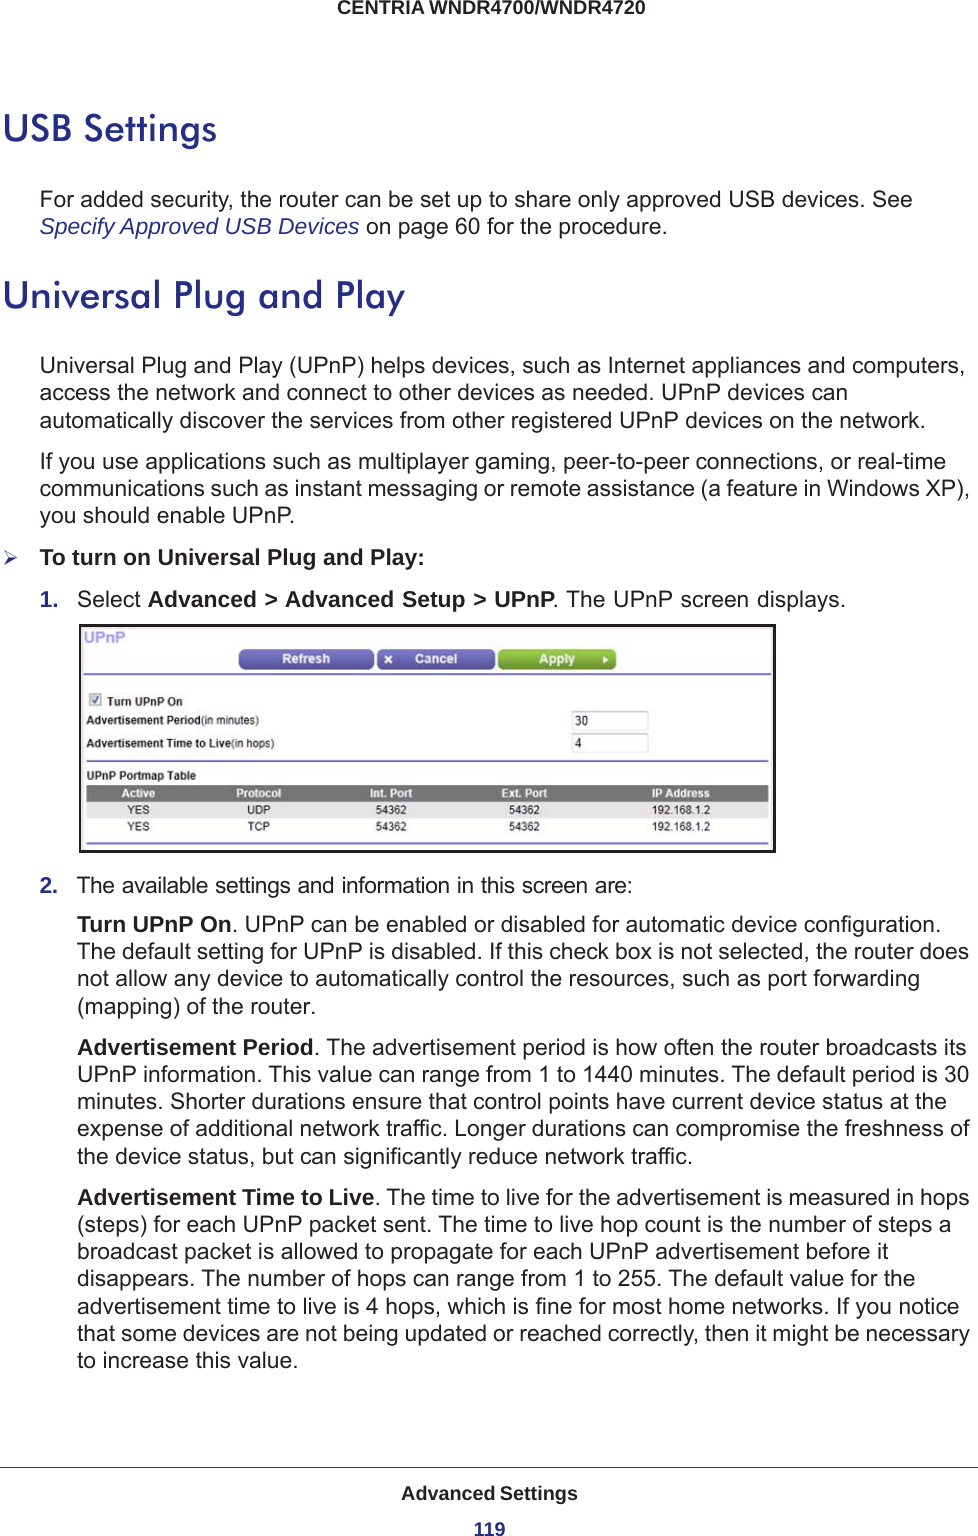 Advanced Settings119 CENTRIA WNDR4700/WNDR4720USB SettingsFor added security, the router can be set up to share only approved USB devices. See Specify Approved USB Devices on page  60 for the procedure.Universal Plug and PlayUniversal Plug and Play (UPnP) helps devices, such as Internet appliances and computers, access the network and connect to other devices as needed. UPnP devices can automatically discover the services from other registered UPnP devices on the network.If you use applications such as multiplayer gaming, peer-to-peer connections, or real-time communications such as instant messaging or remote assistance (a feature in Windows XP), you should enable UPnP.To turn on Universal Plug and Play:1.  Select Advanced &gt; Advanced Setup &gt; UPnP. The UPnP screen displays. 2.  The available settings and information in this screen are:Turn UPnP On. UPnP can be enabled or disabled for automatic device configuration. The default setting for UPnP is disabled. If this check box is not selected, the router does not allow any device to automatically control the resources, such as port forwarding (mapping) of the router. Advertisement Period. The advertisement period is how often the router broadcasts its UPnP information. This value can range from 1 to 1440 minutes. The default period is 30 minutes. Shorter durations ensure that control points have current device status at the expense of additional network traffic. Longer durations can compromise the freshness of the device status, but can significantly reduce network traffic.Advertisement Time to Live. The time to live for the advertisement is measured in hops (steps) for each UPnP packet sent. The time to live hop count is the number of steps a broadcast packet is allowed to propagate for each UPnP advertisement before it disappears. The number of hops can range from 1 to 255. The default value for the advertisement time to live is 4 hops, which is fine for most home networks. If you notice that some devices are not being updated or reached correctly, then it might be necessary to increase this value.